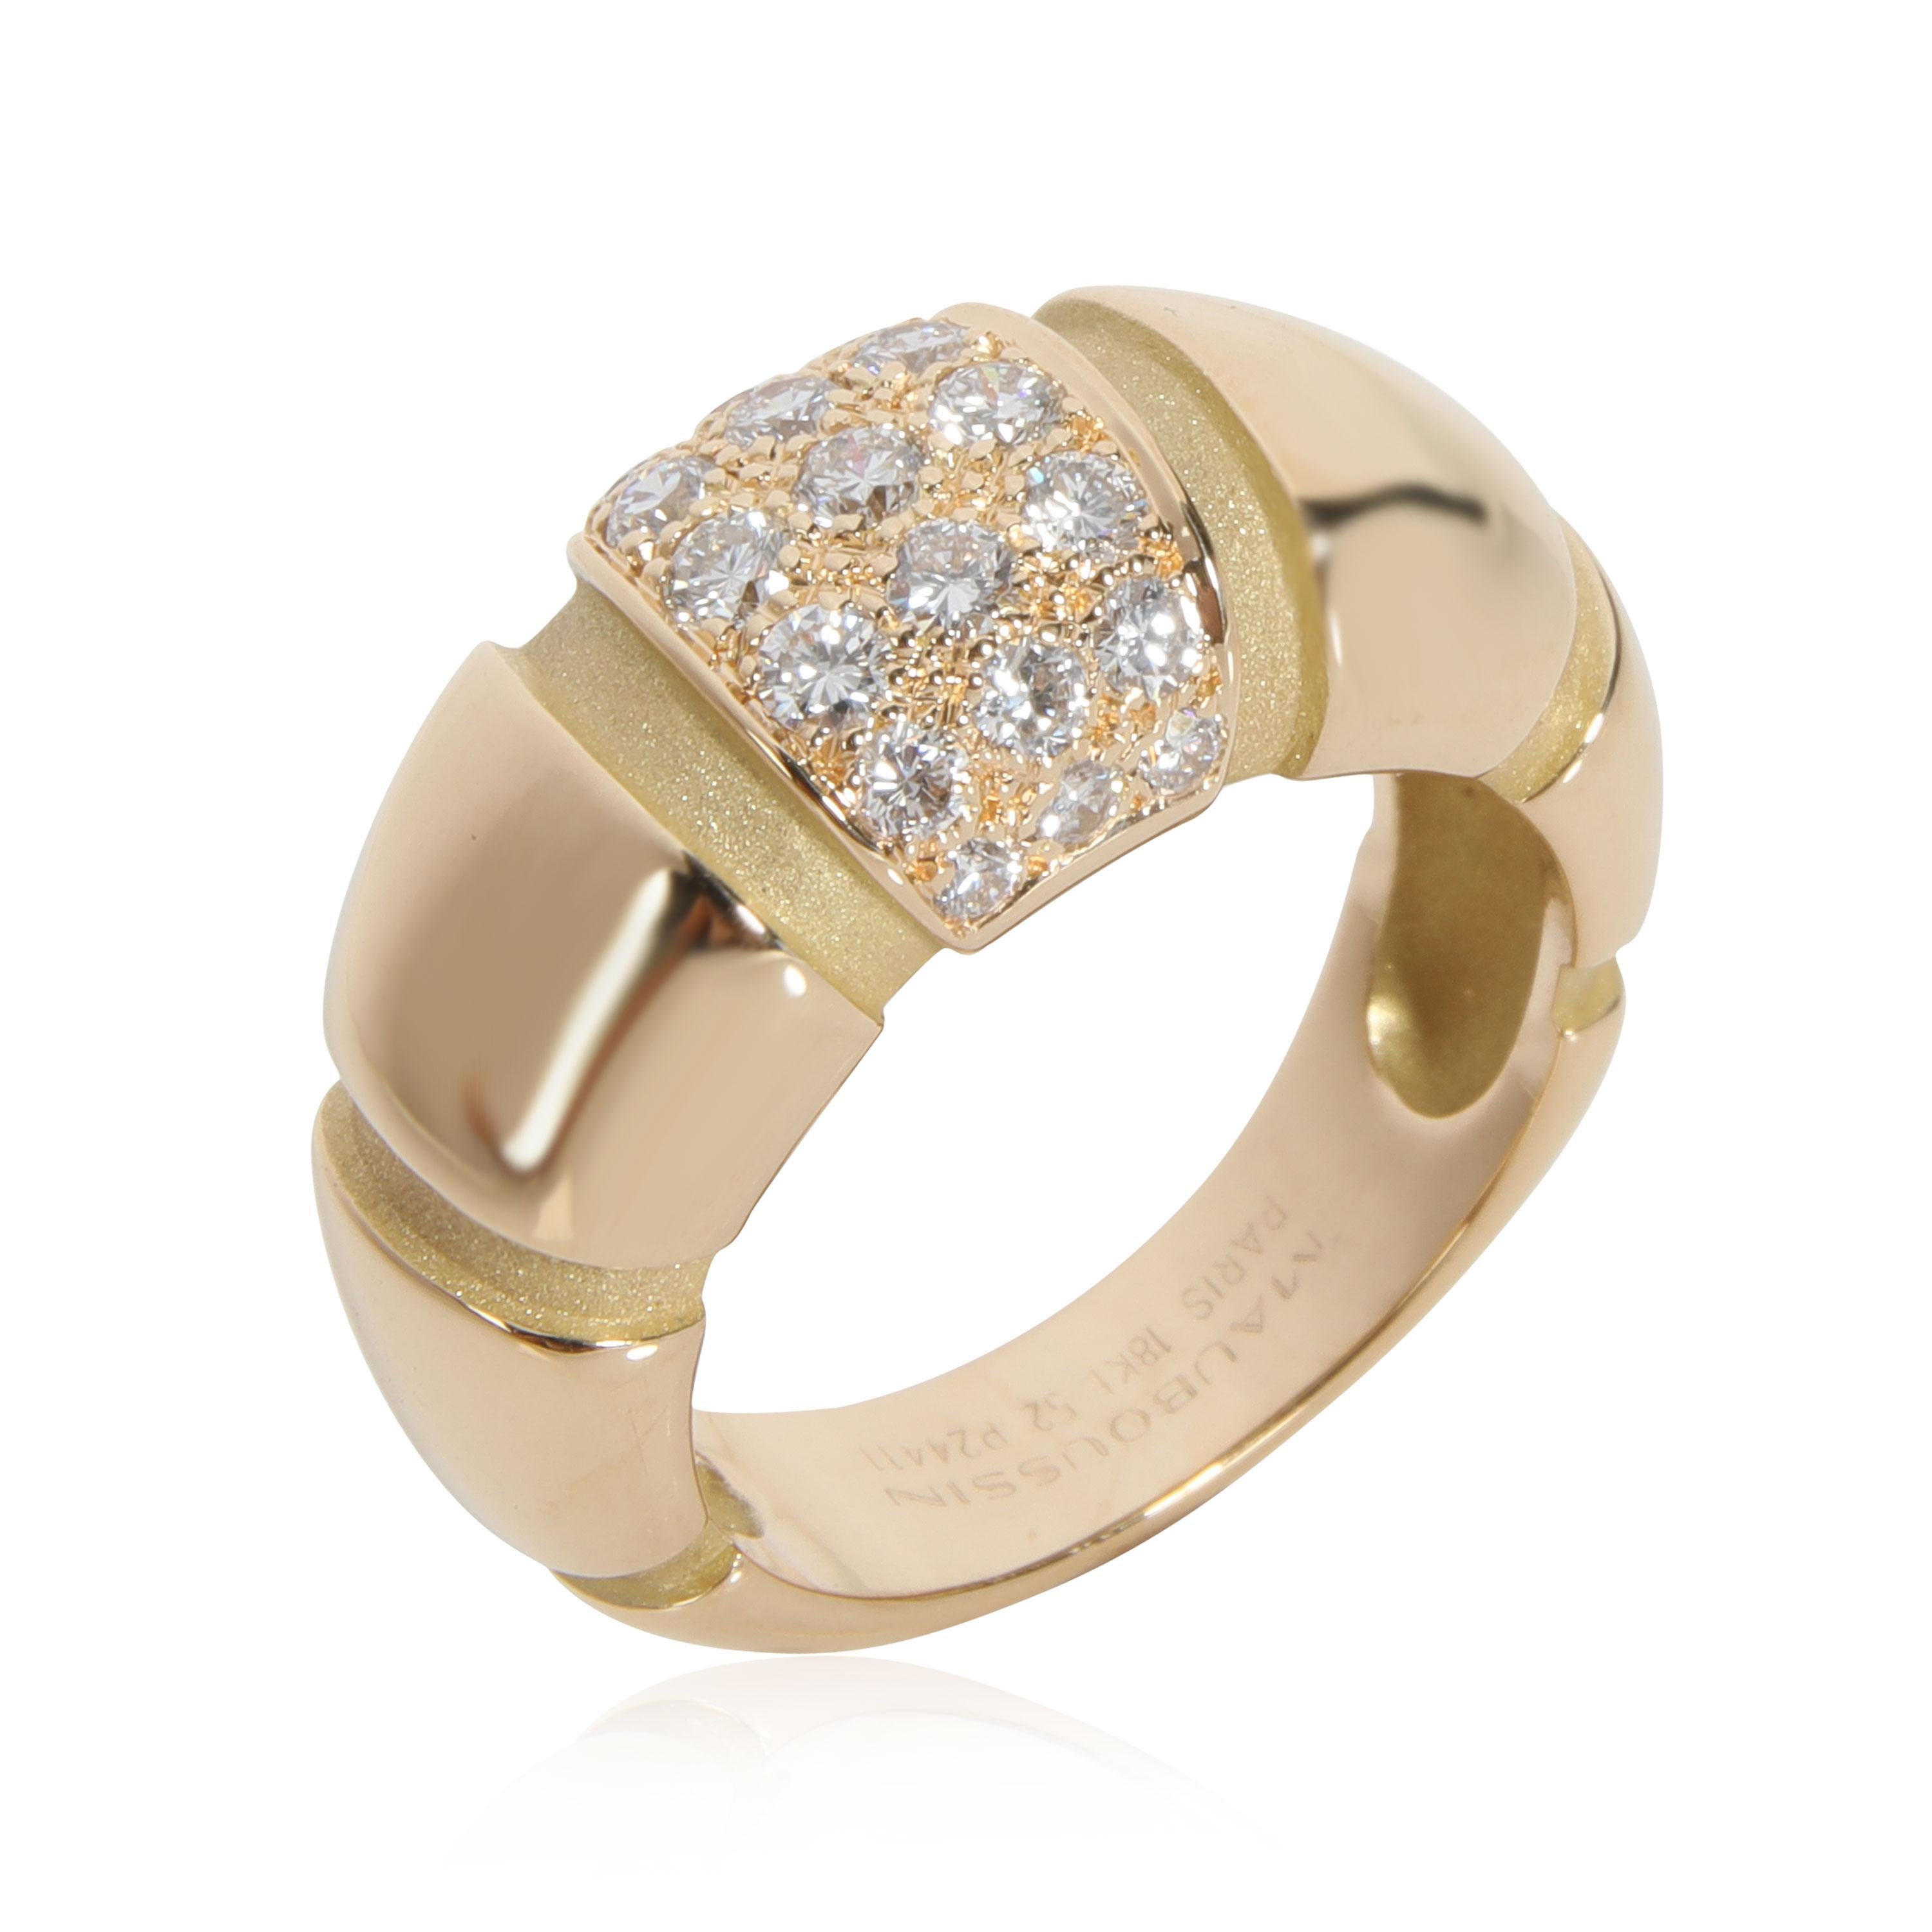 Mauboussin Nadja Diamond Ring in 18k Yellow Gold 0.45 CTW

PRIMARY DETAILS
SKU: 112131
Listing Title: Mauboussin Nadja Diamond Ring in 18k Yellow Gold 0.45 CTW
Condition Description: Retails for 4,500 USD. In excellent condition and recently